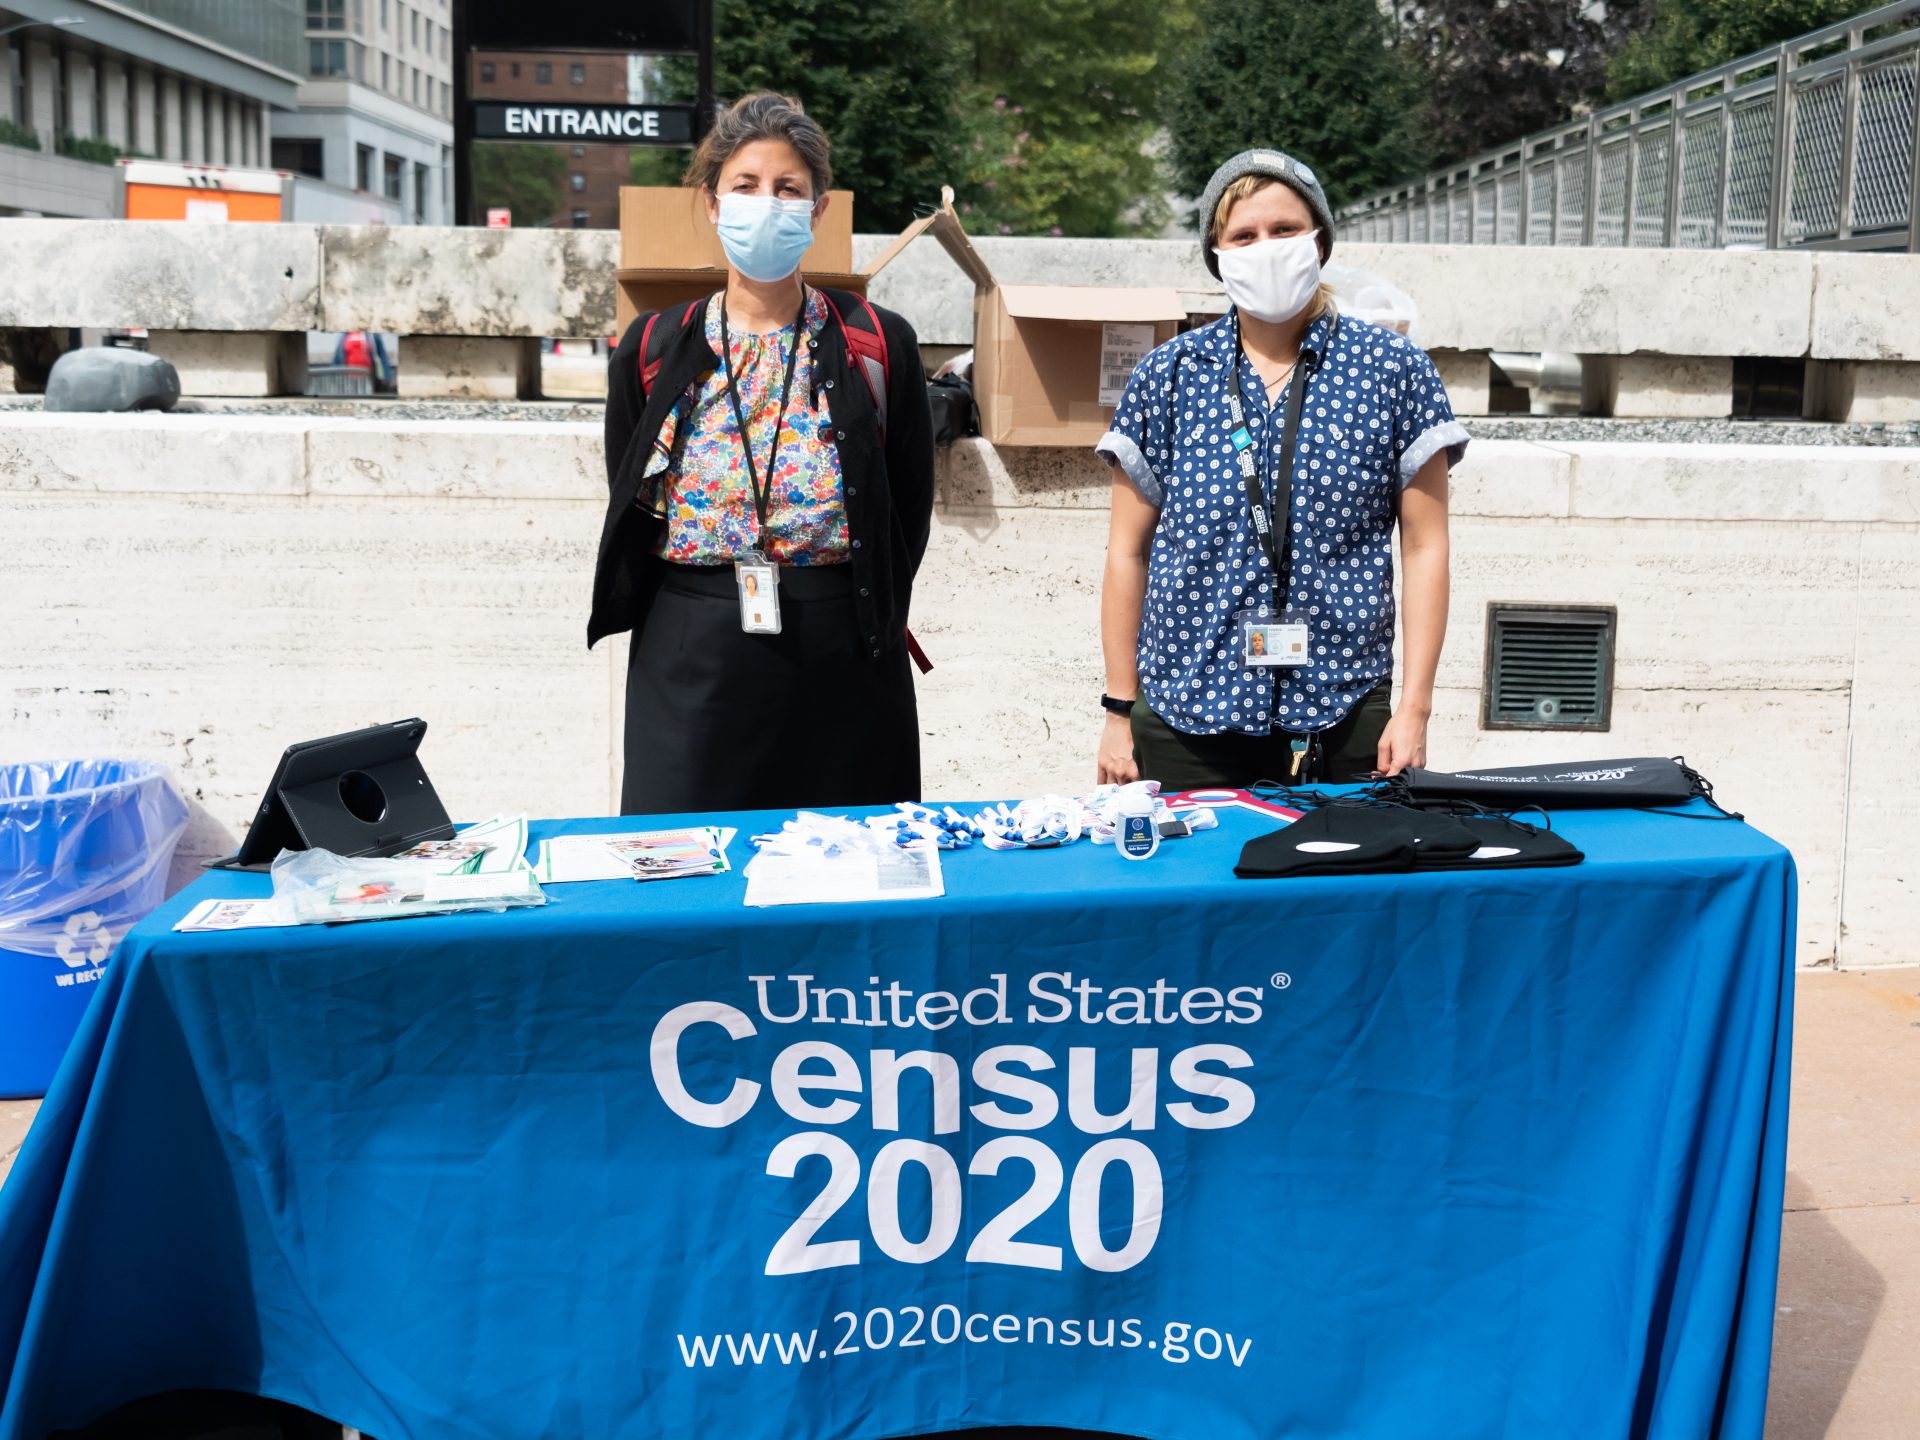 U.S. Census Bureau workers stand outside the Lincoln Center in New York City in September. A federal judge has ordered the bureau to keep counting for the 2020 census through Oct. 31 for now.